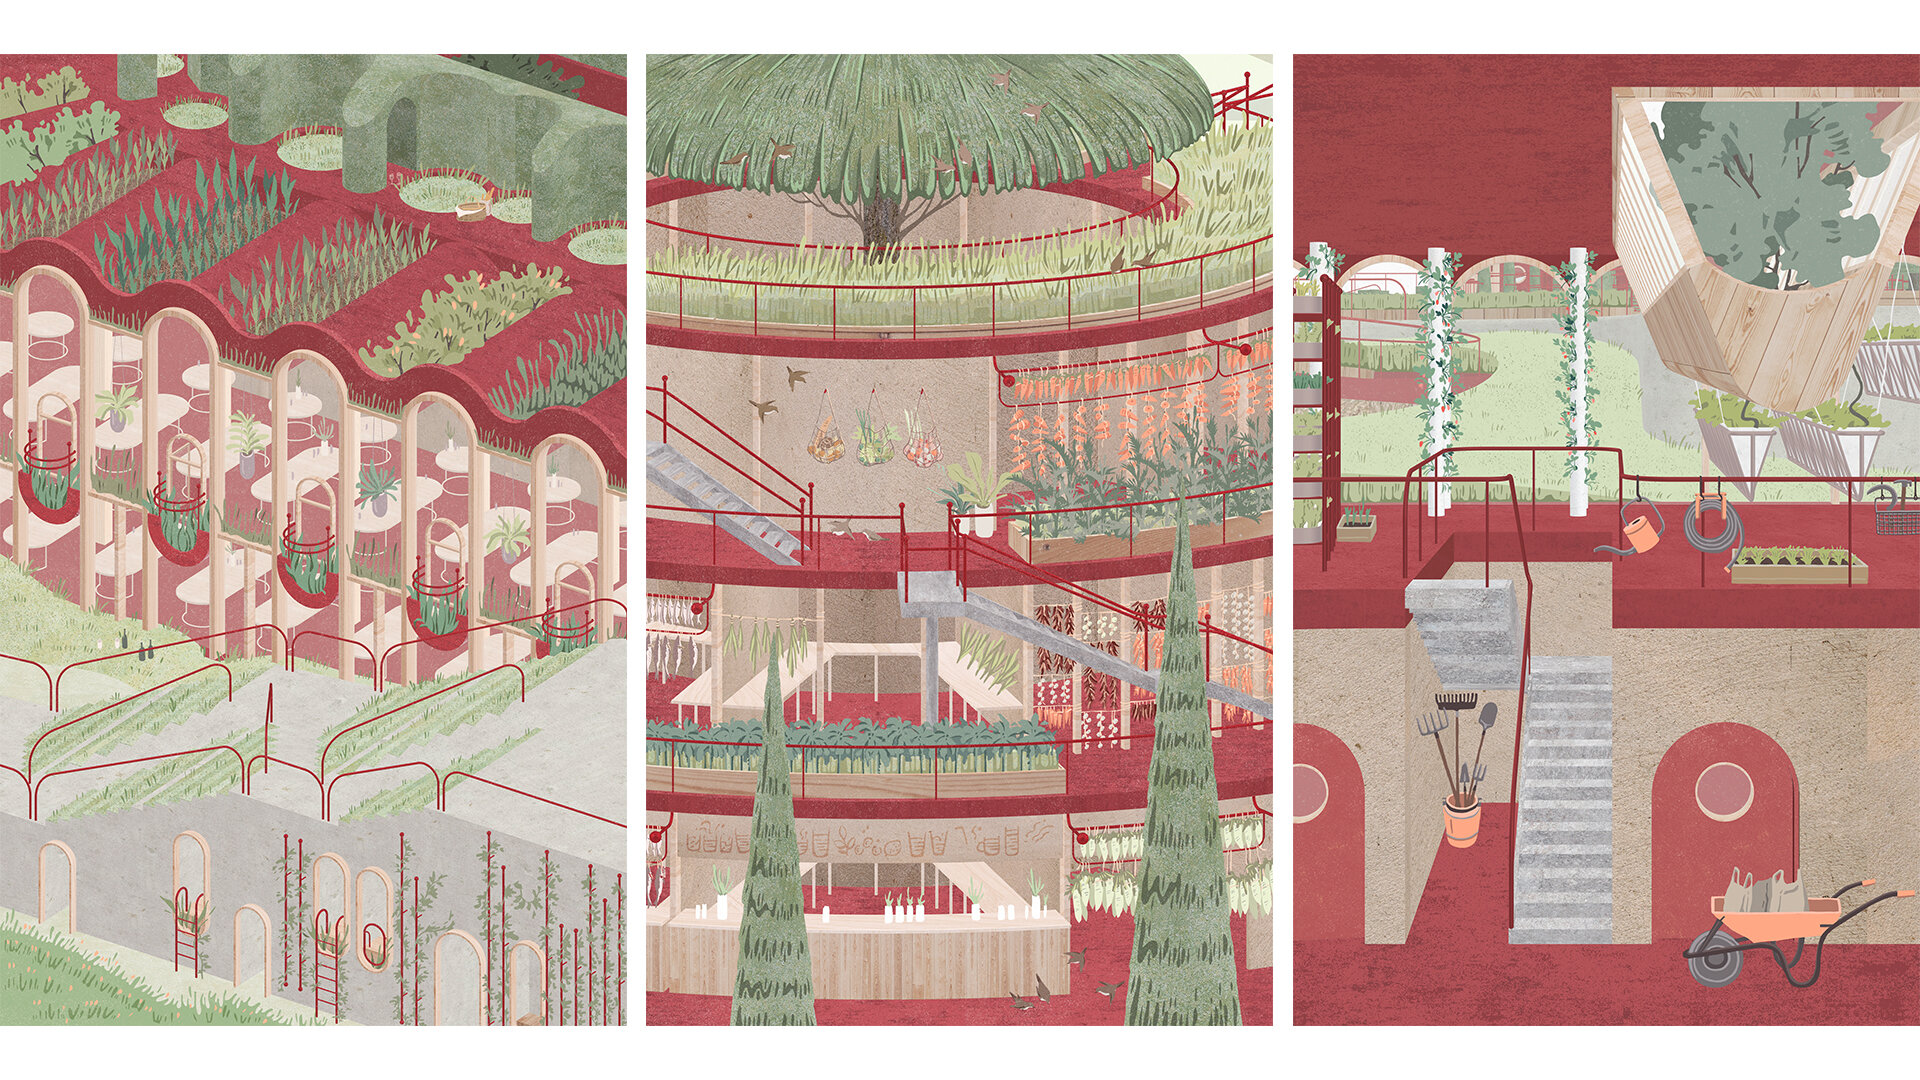 Productive Landscape - Regent’s Park Food Community_Meiying Hong_MArch Year 5, Bartlett School of Architecture, UCL 9.jpg